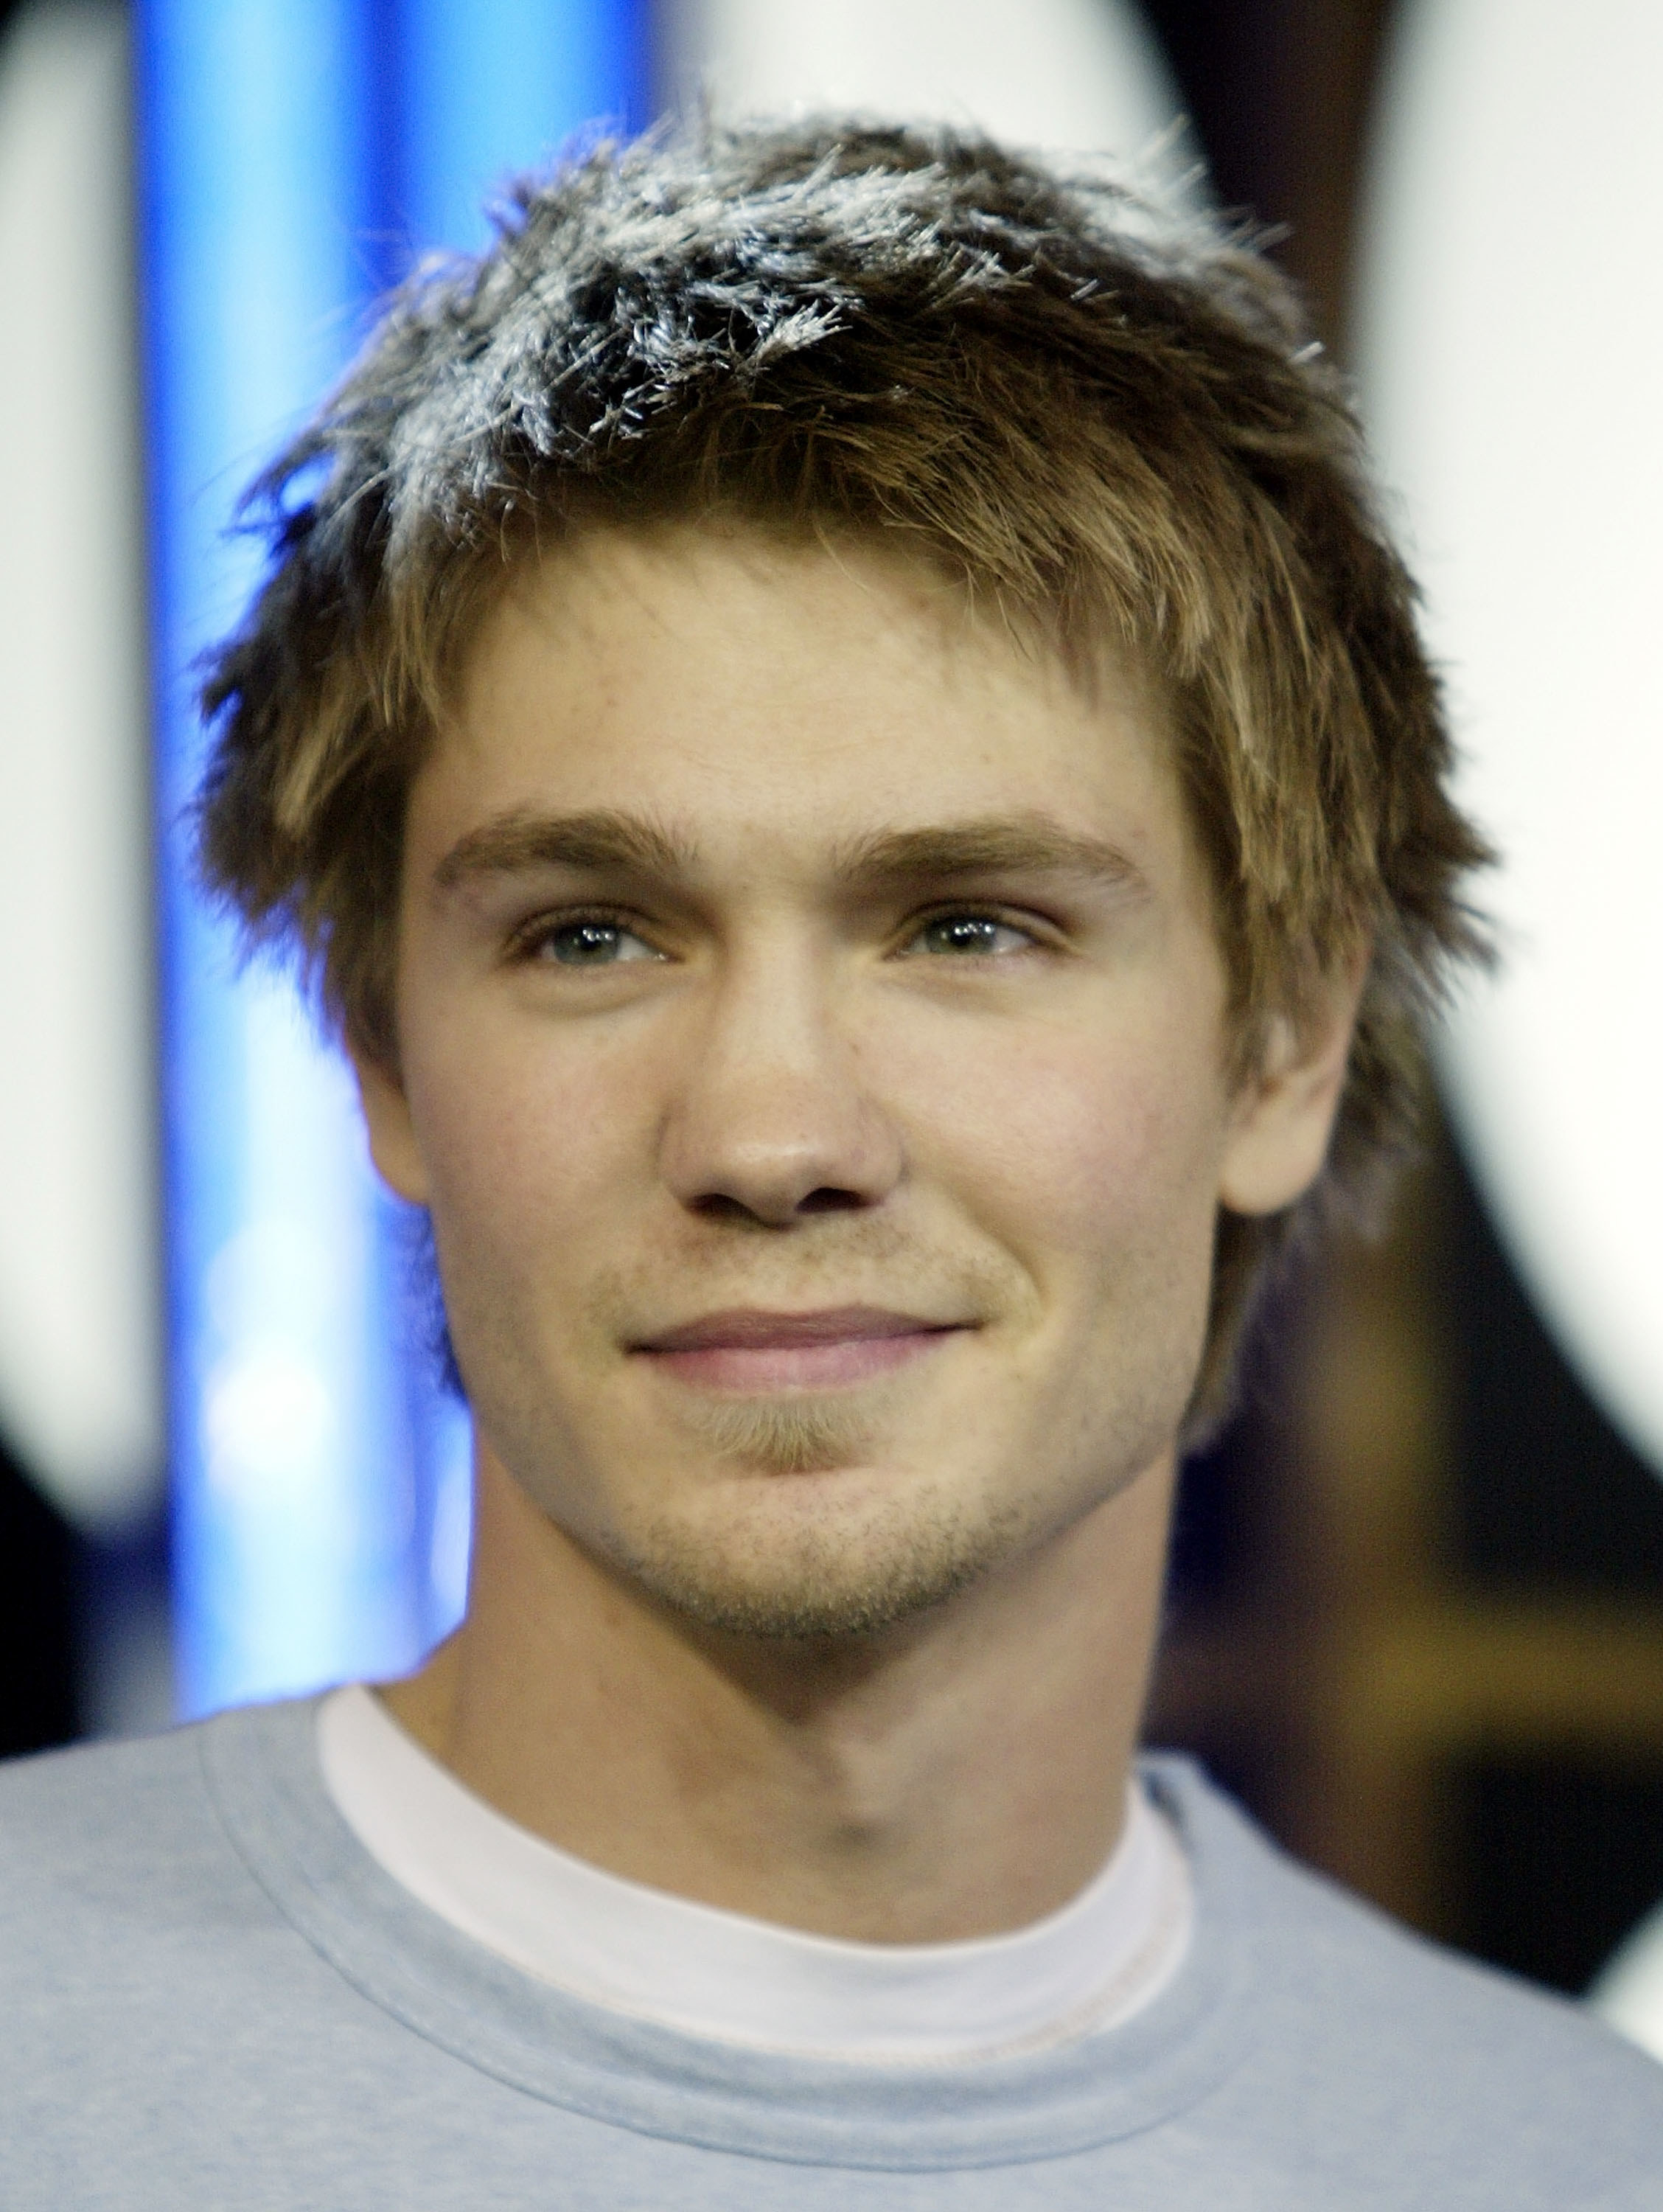 Chad Michael Murray makes an appearance on MTV for the "TRL BreakOut Stars Week" on January 16, 2004